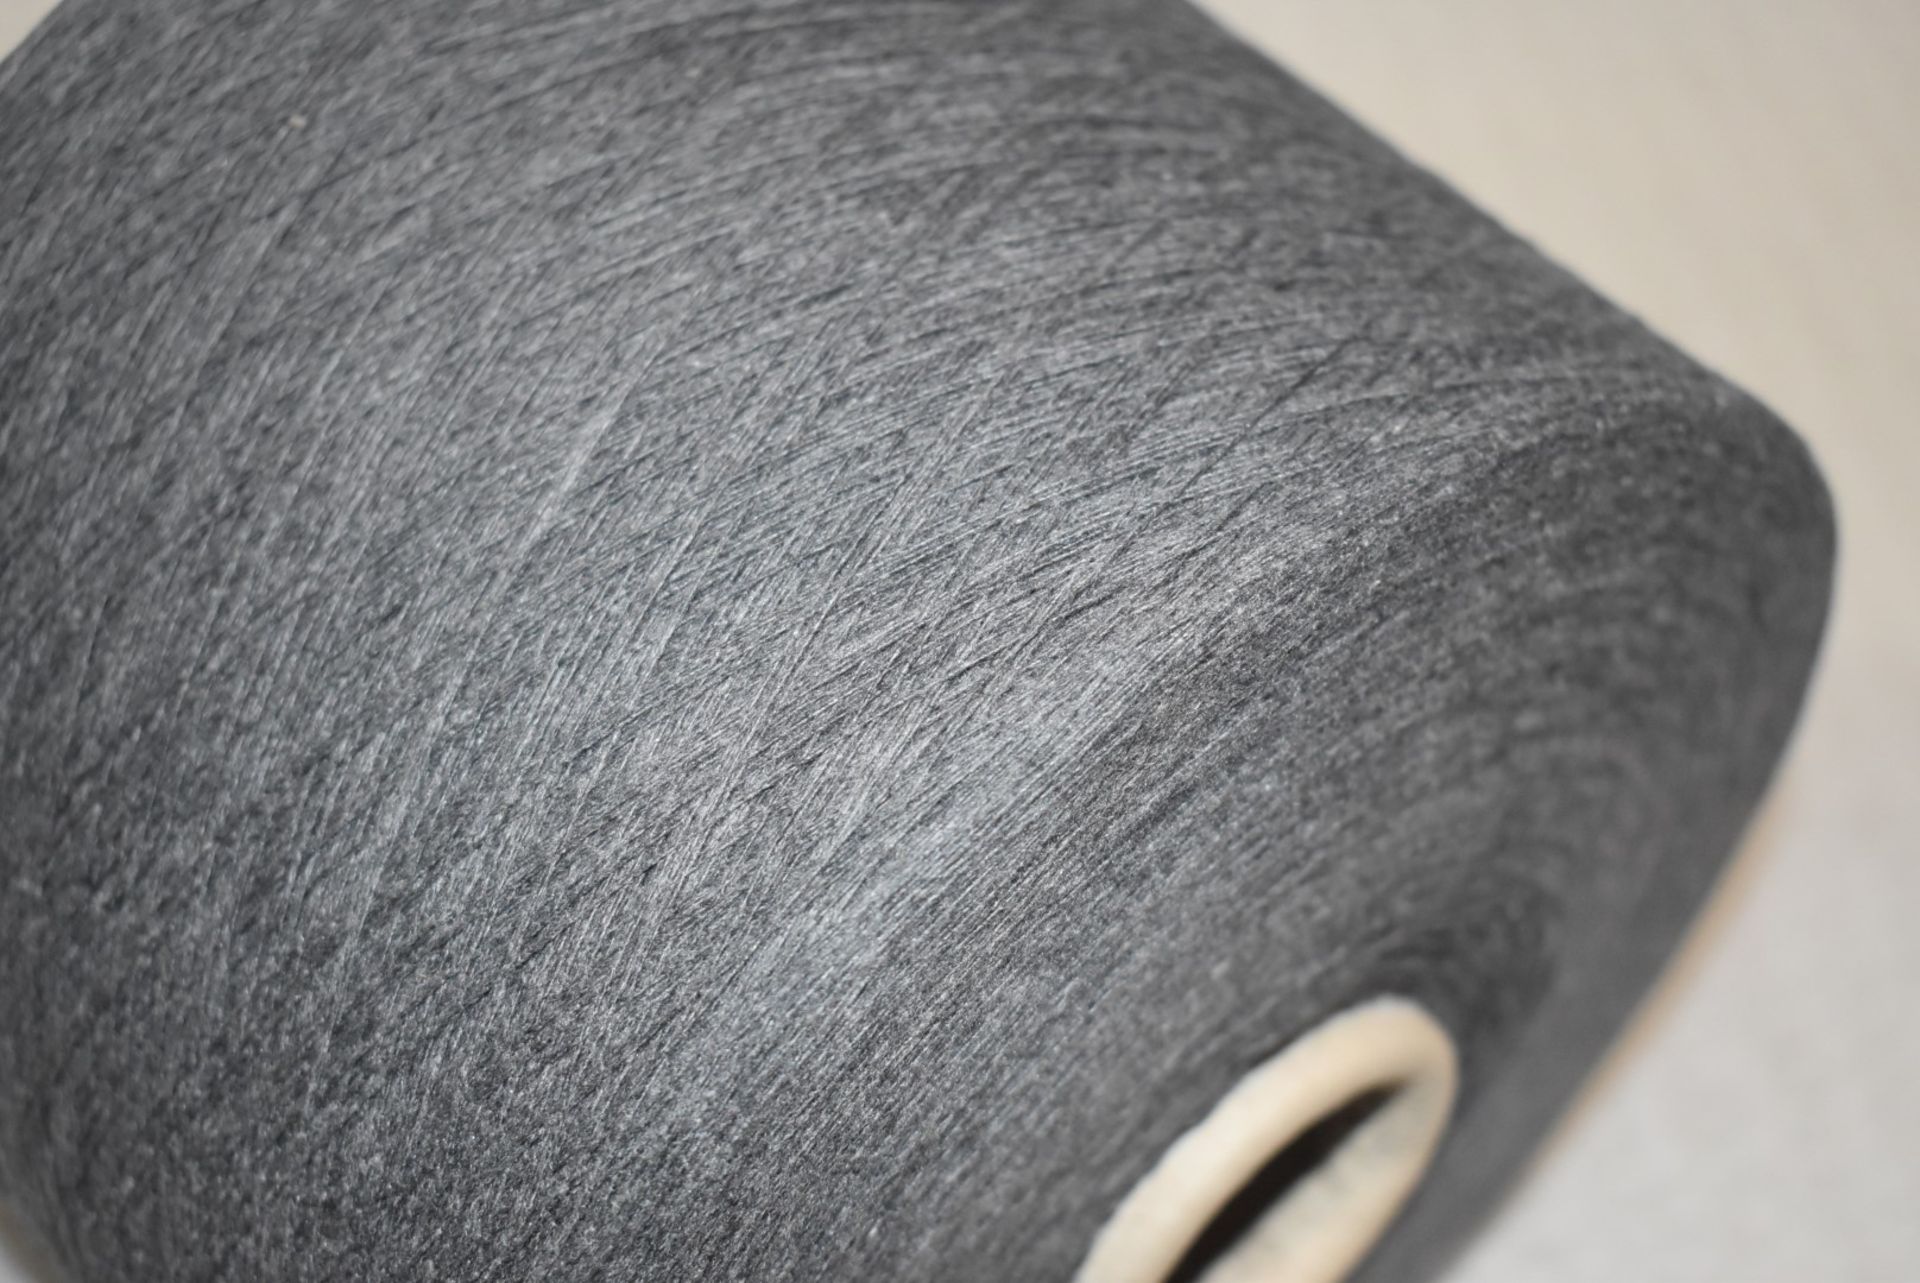 1 x Cone of 1/13 MicroCotton Knitting Yarn - Mid Grey - Approx Weight: 2,500g - New Stock ABL Yarn - Image 18 of 18